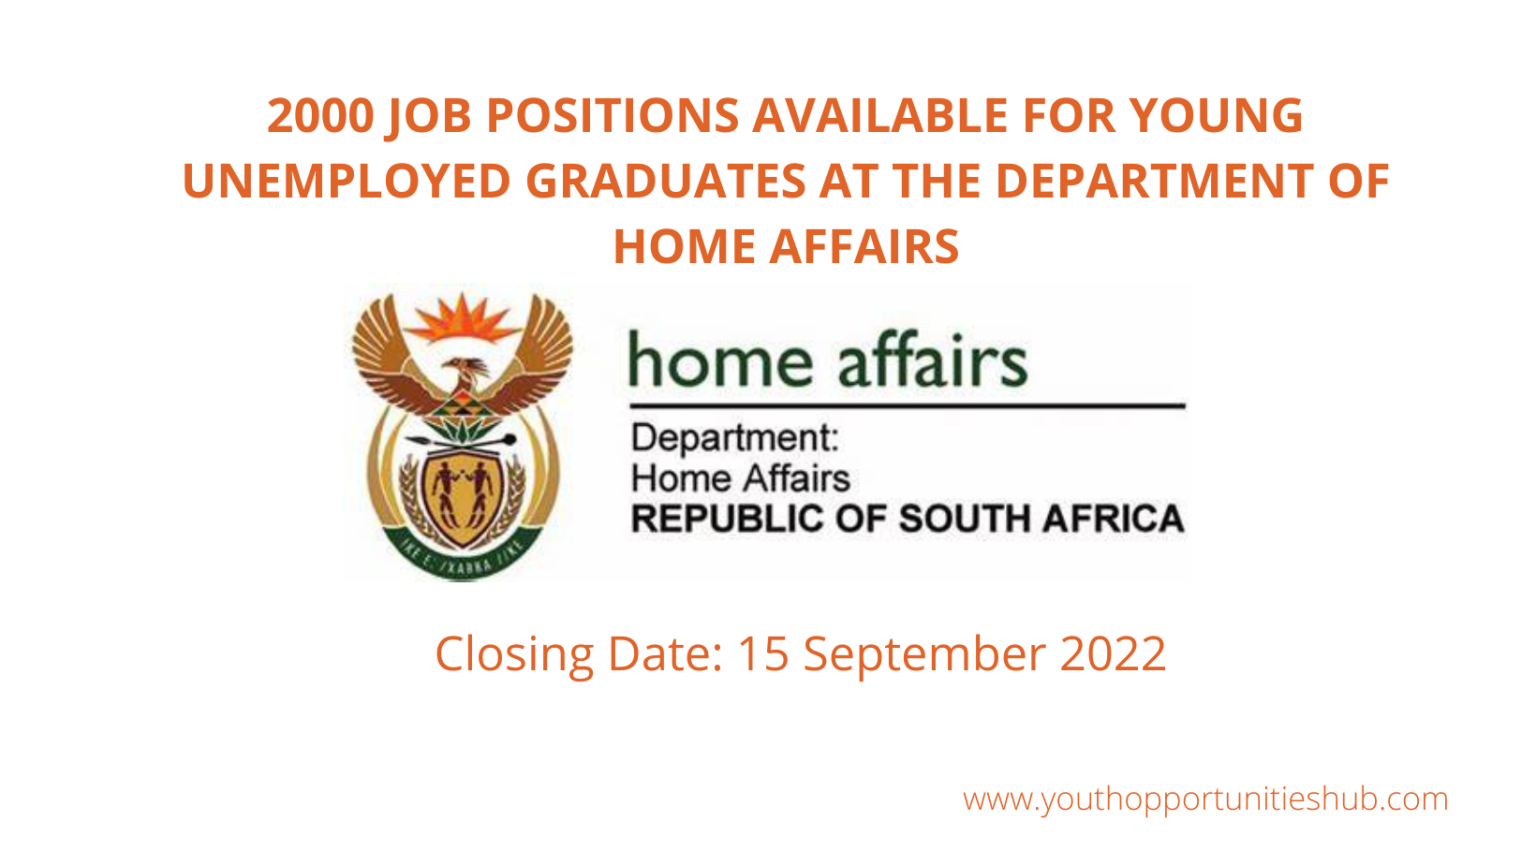 2000 JOB POSITIONS AVAILABLE FOR YOUNG UNEMPLOYED GRADUATES AT THE DEPARTMENT OF HOME AFFAIRS (South Africa)